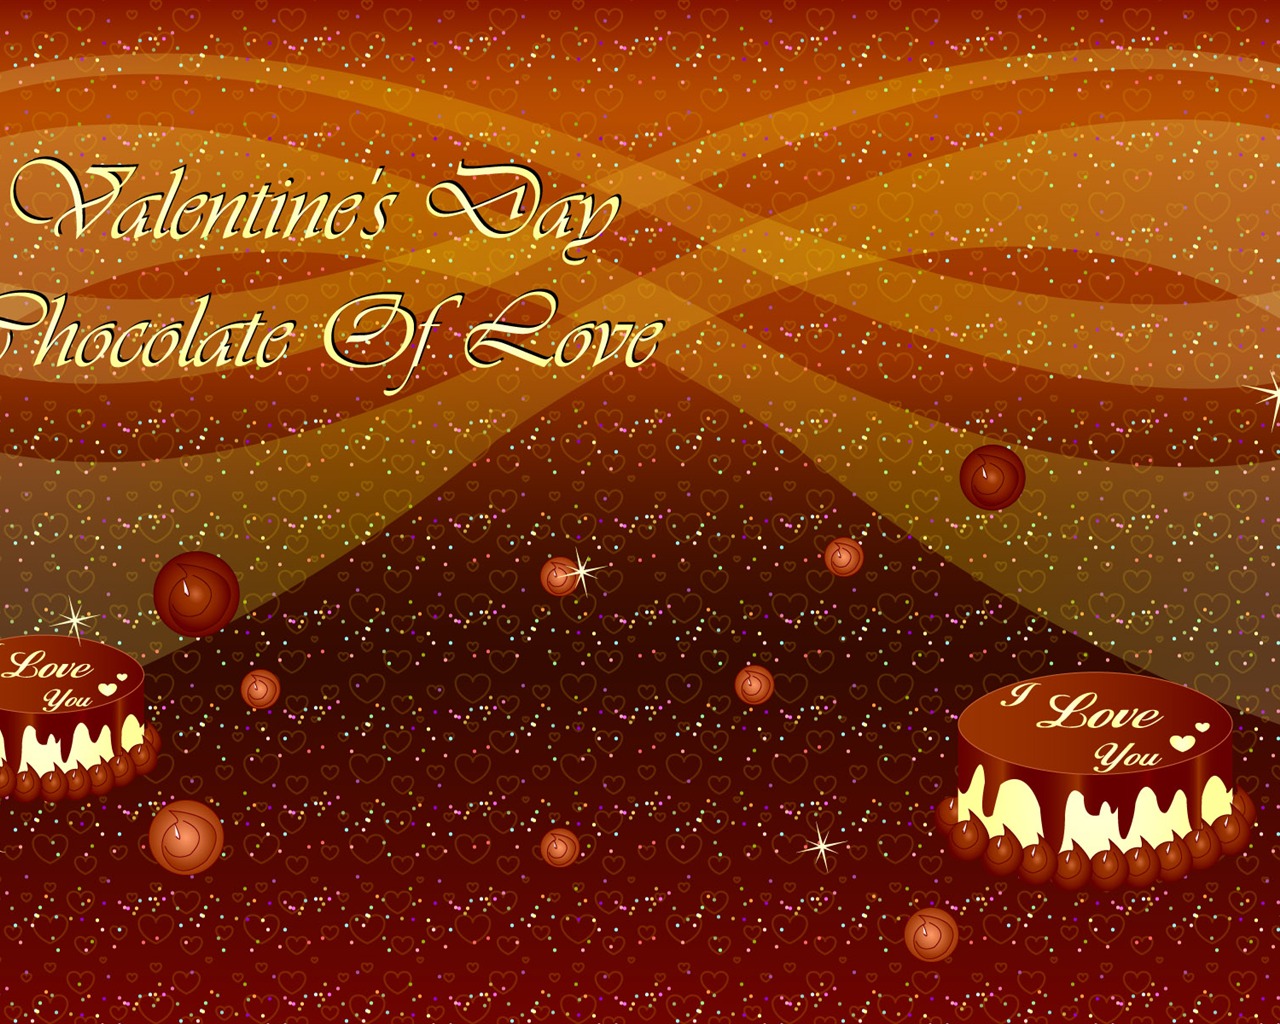 Valentine's Day Theme Wallpapers (2) #4 - 1280x1024